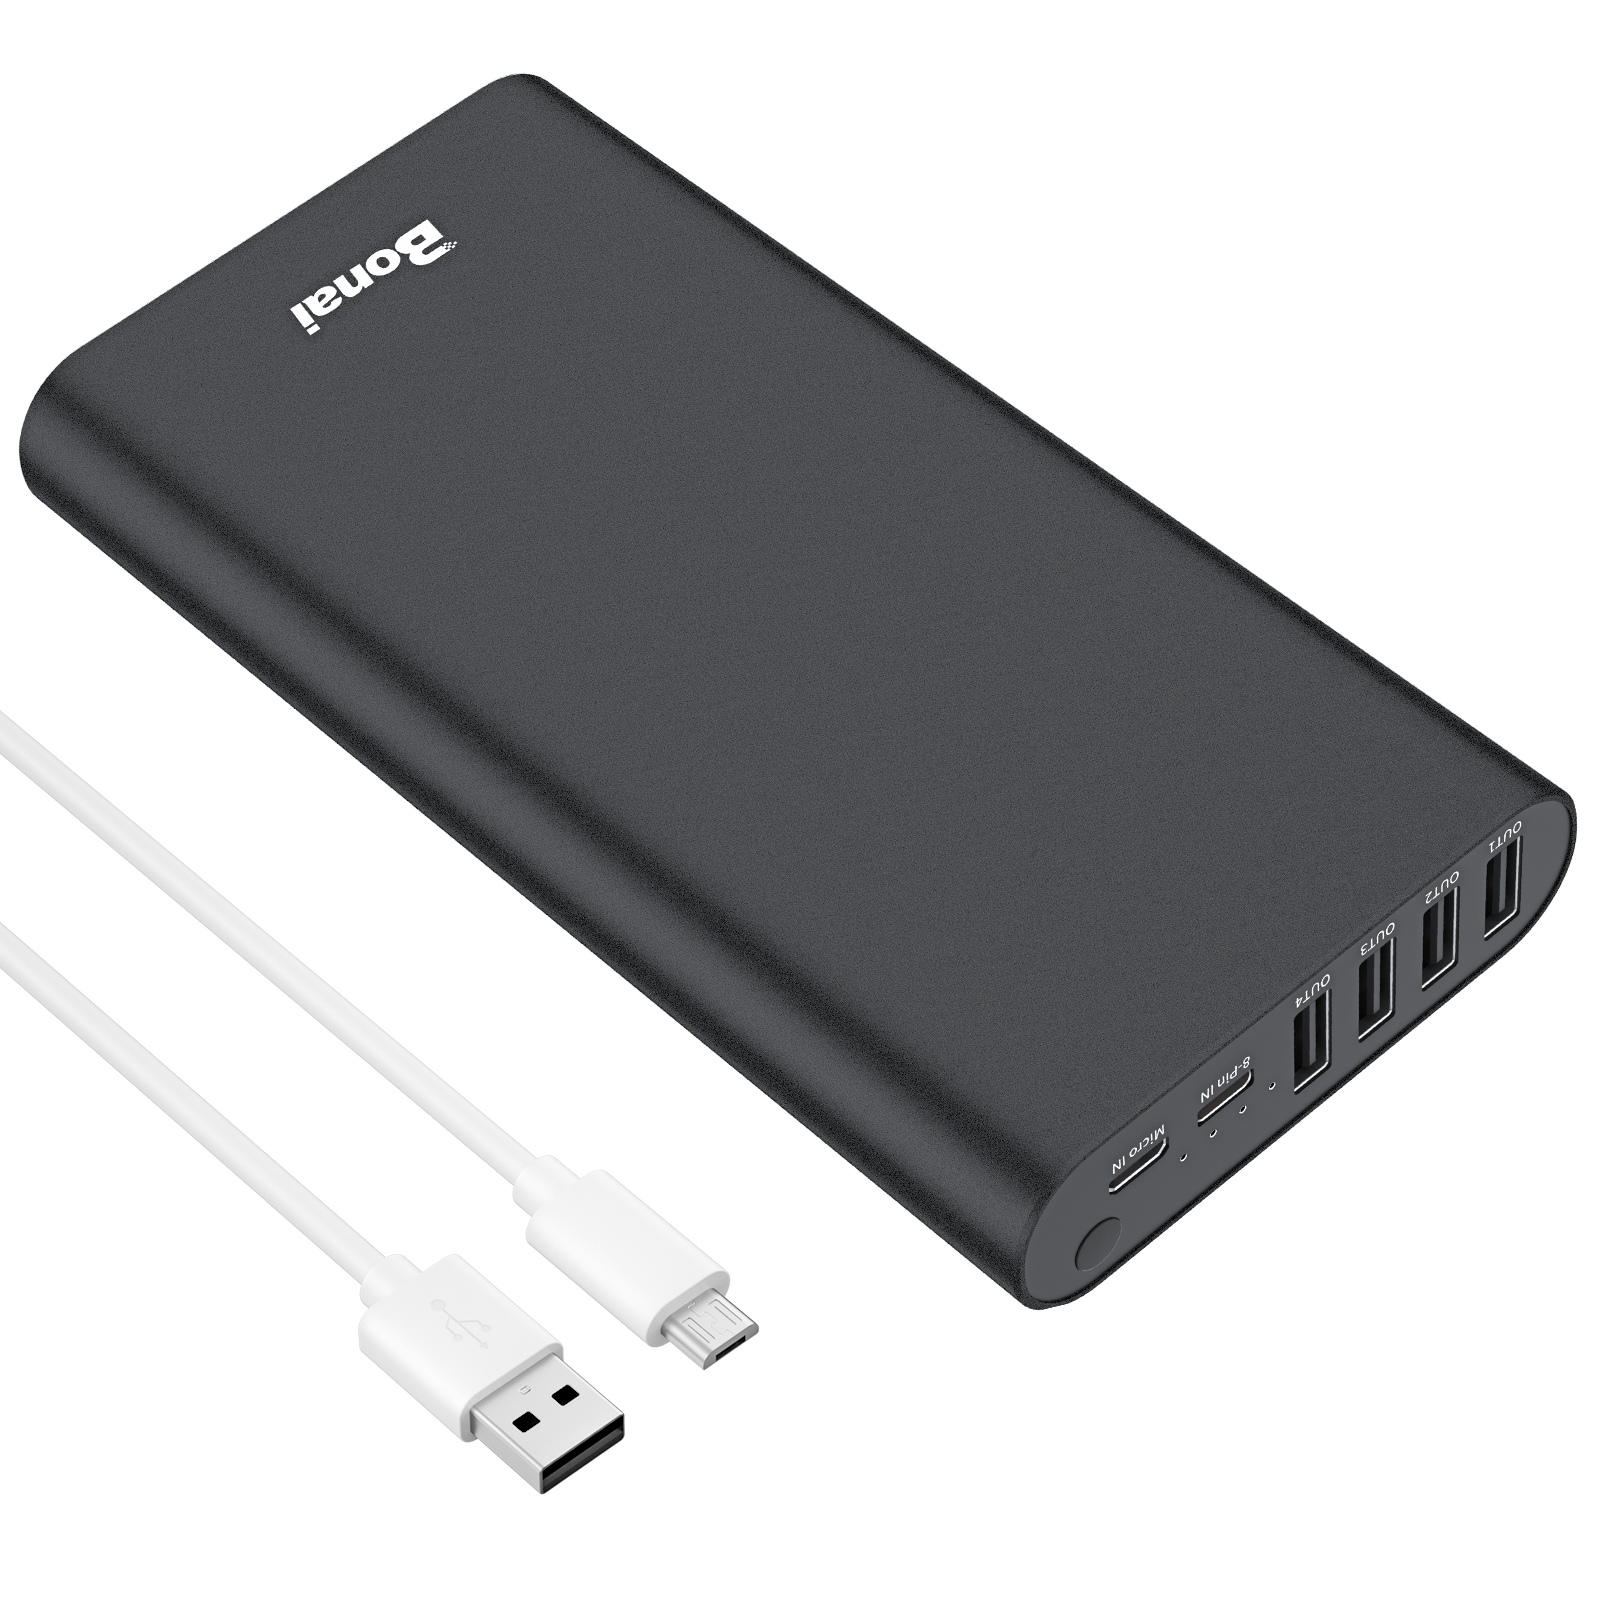 BONAI Portable Charger 20000mAh iPhone Charger Aluminum External Battery Pack Power Bank 4 USB Outputs(2.1A), High-Speed Charging Compatible with iPhone 13 12 11 X iPad Tablet Samsung - Black